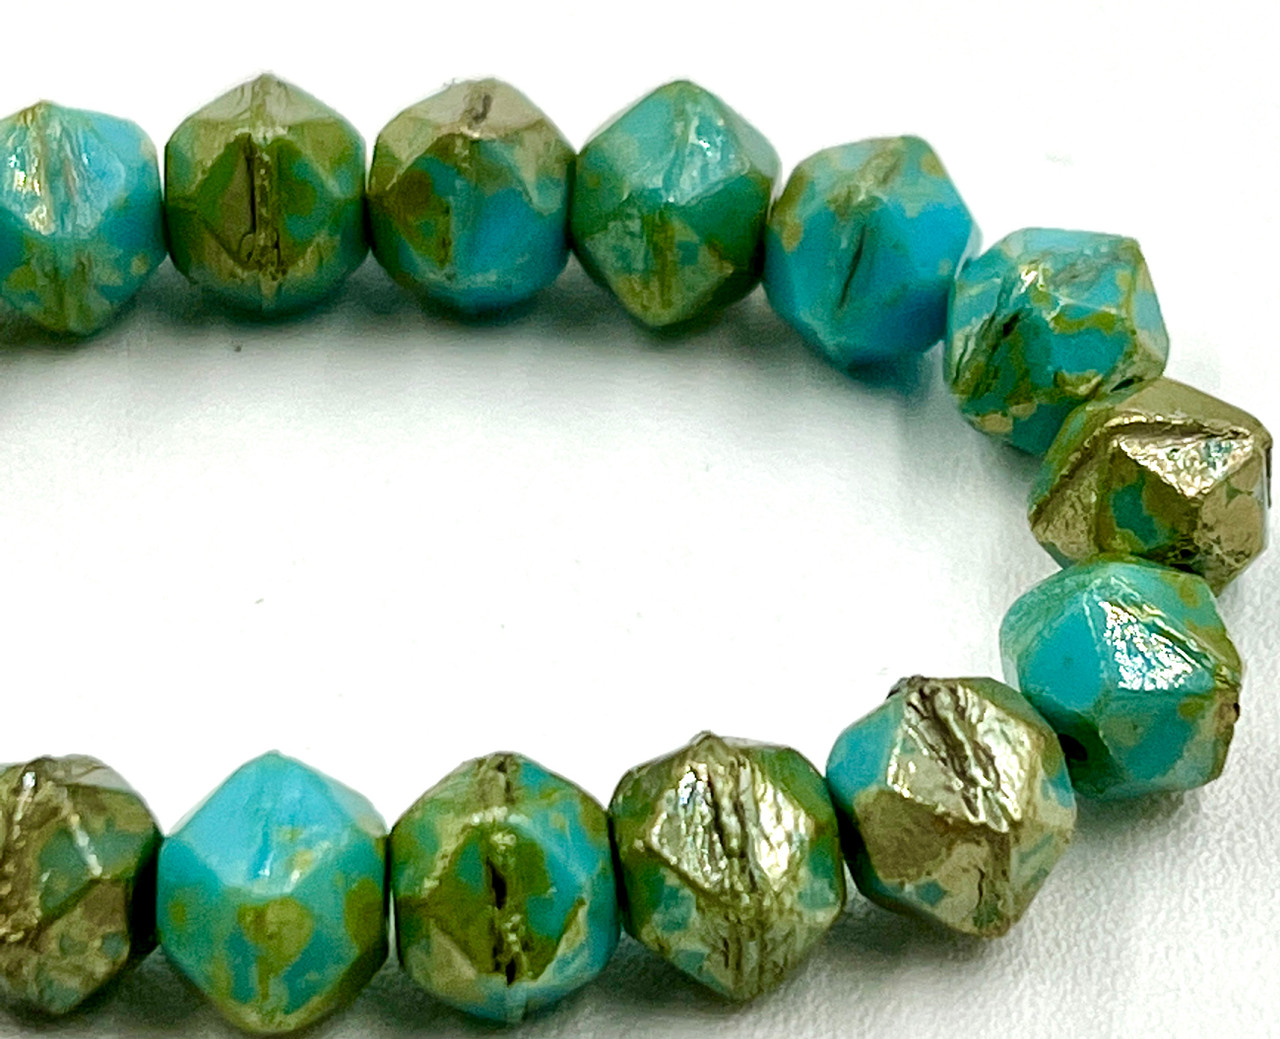 8mm English Cut Blue Turquoise with a Picasso Finish (20 Beads)